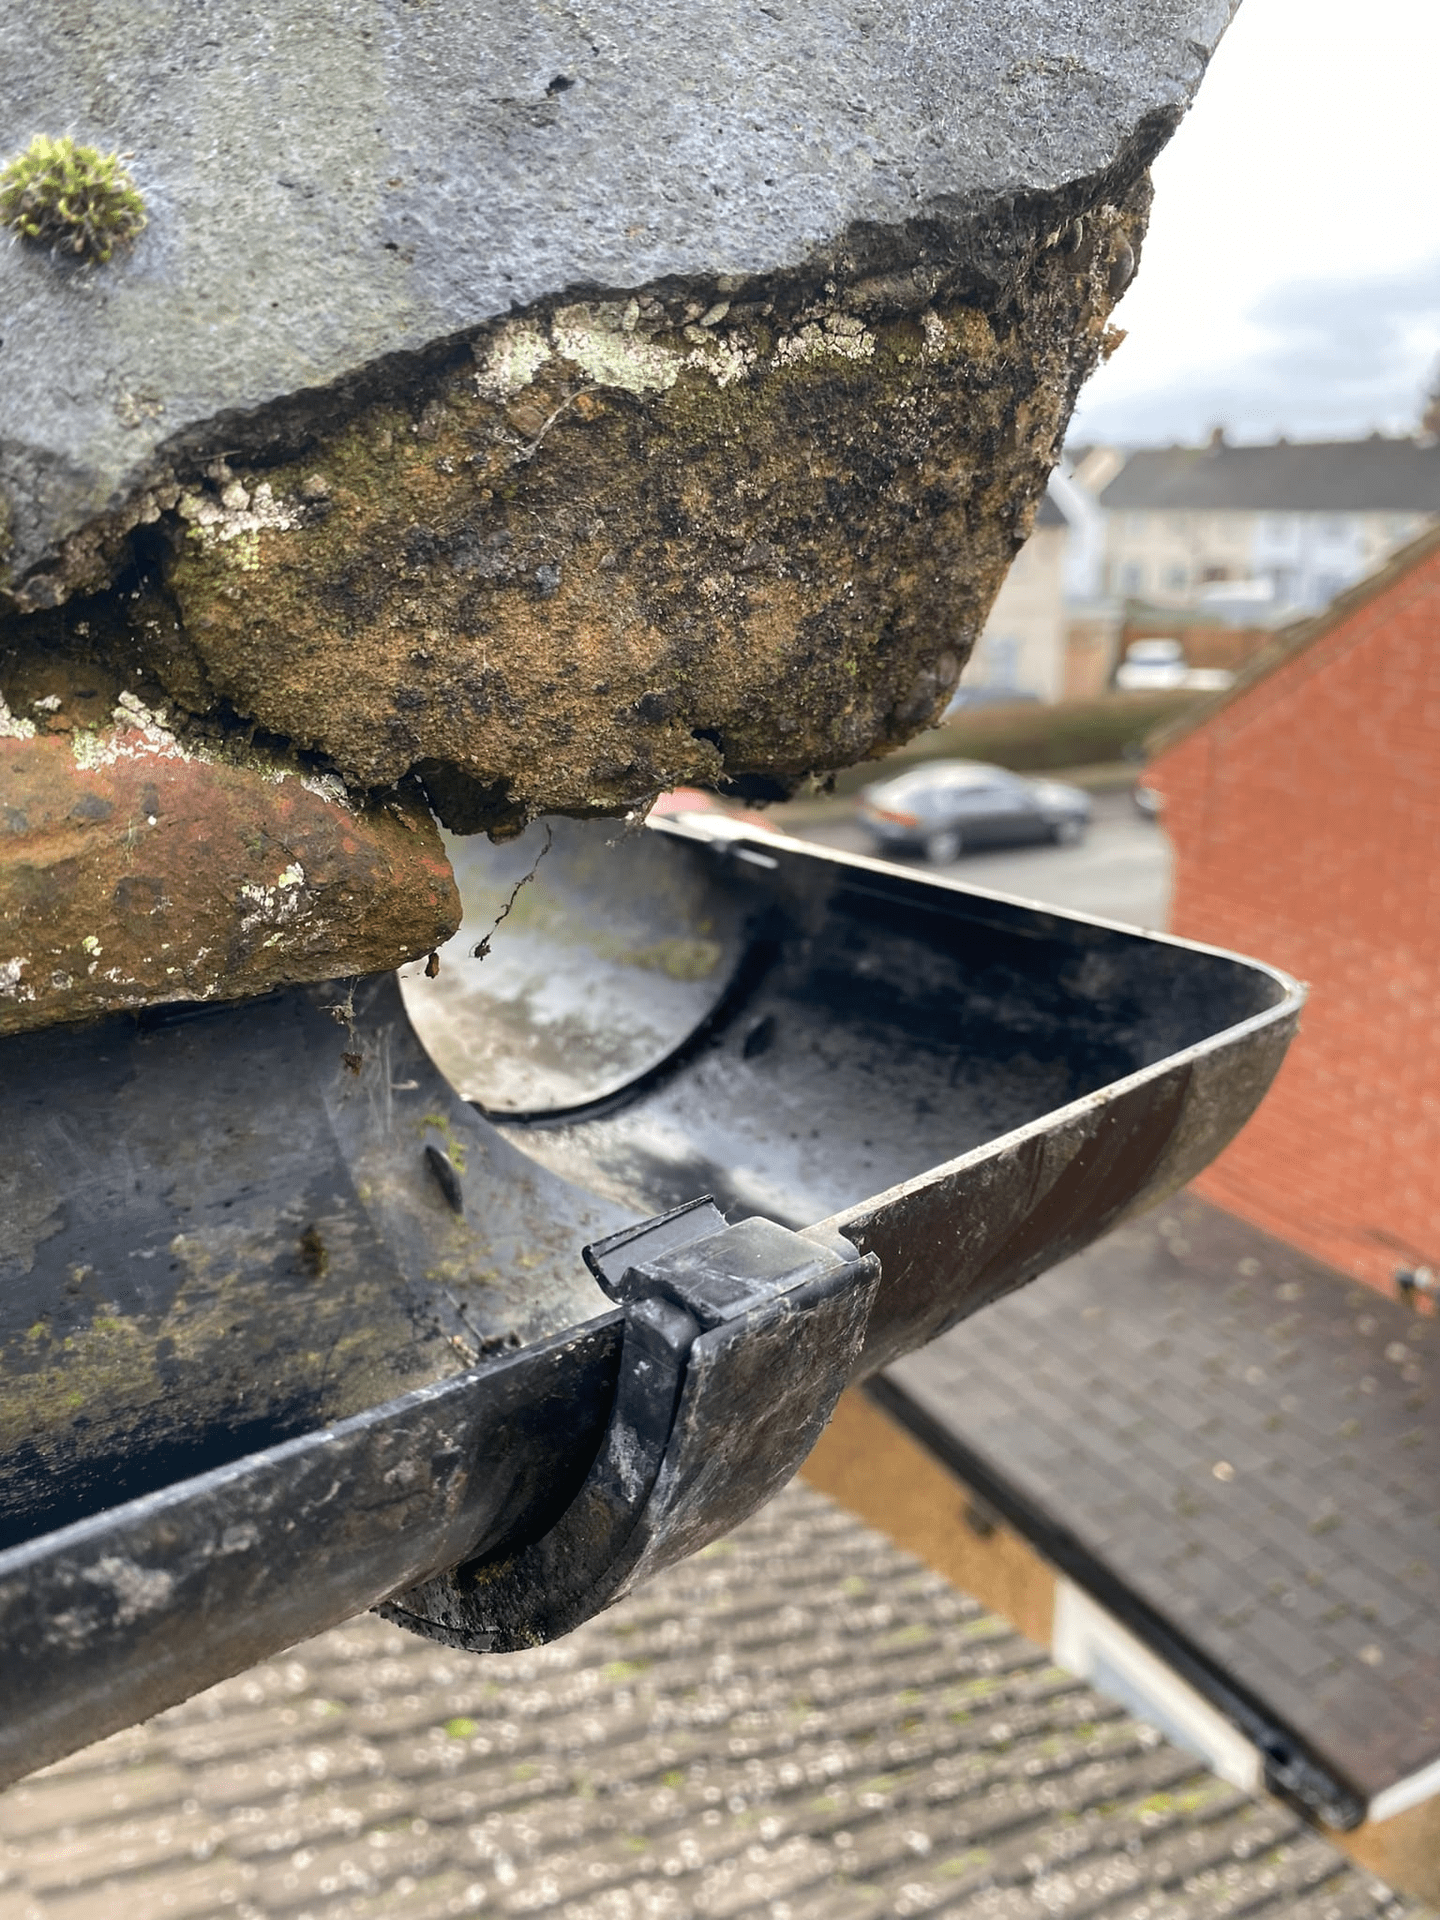 Gutters clipped back together as part of Prestige Bin Cleaning gutter cleaning service